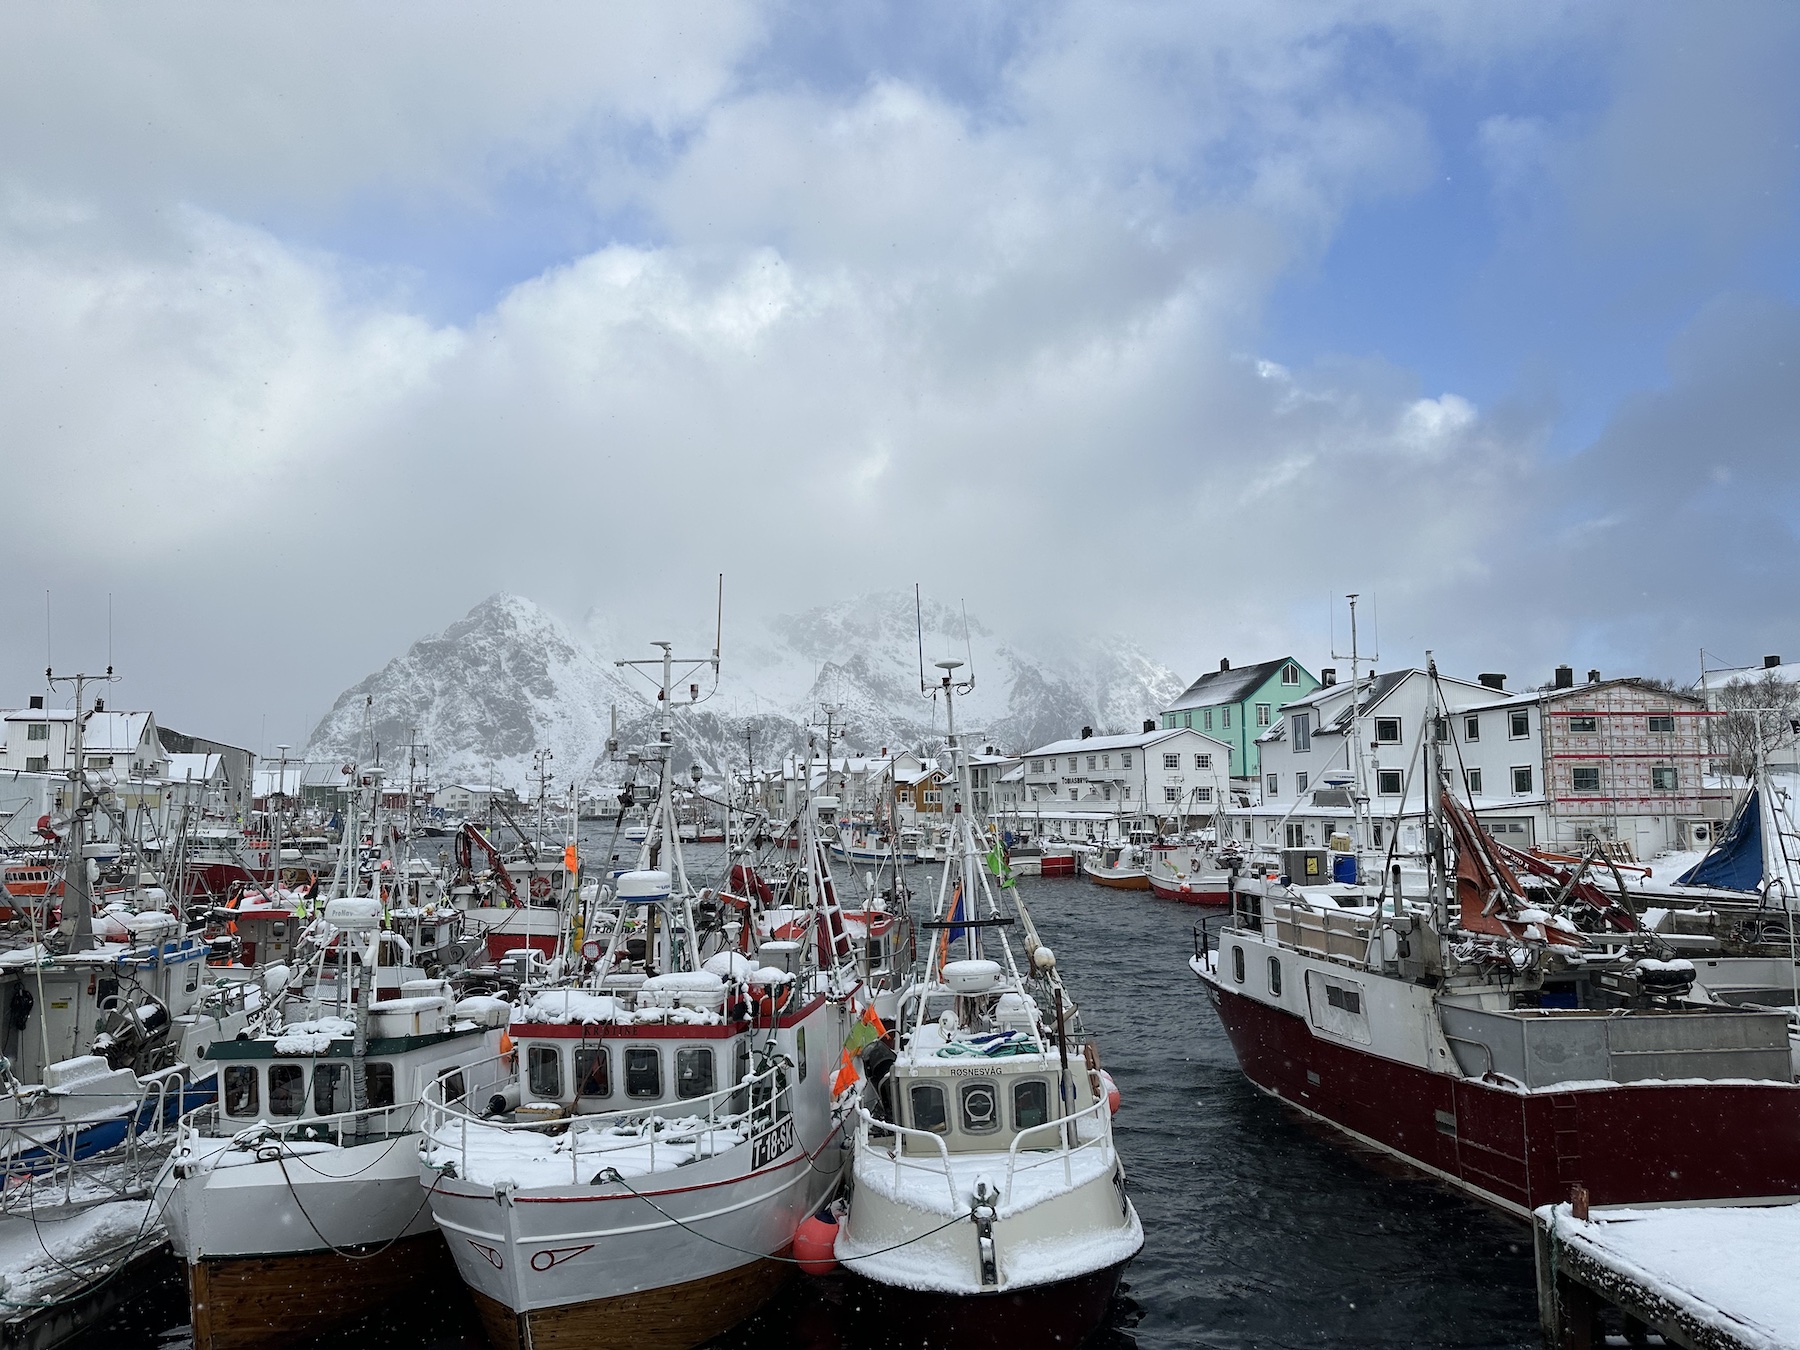 The fishing boats of Henningsvaer